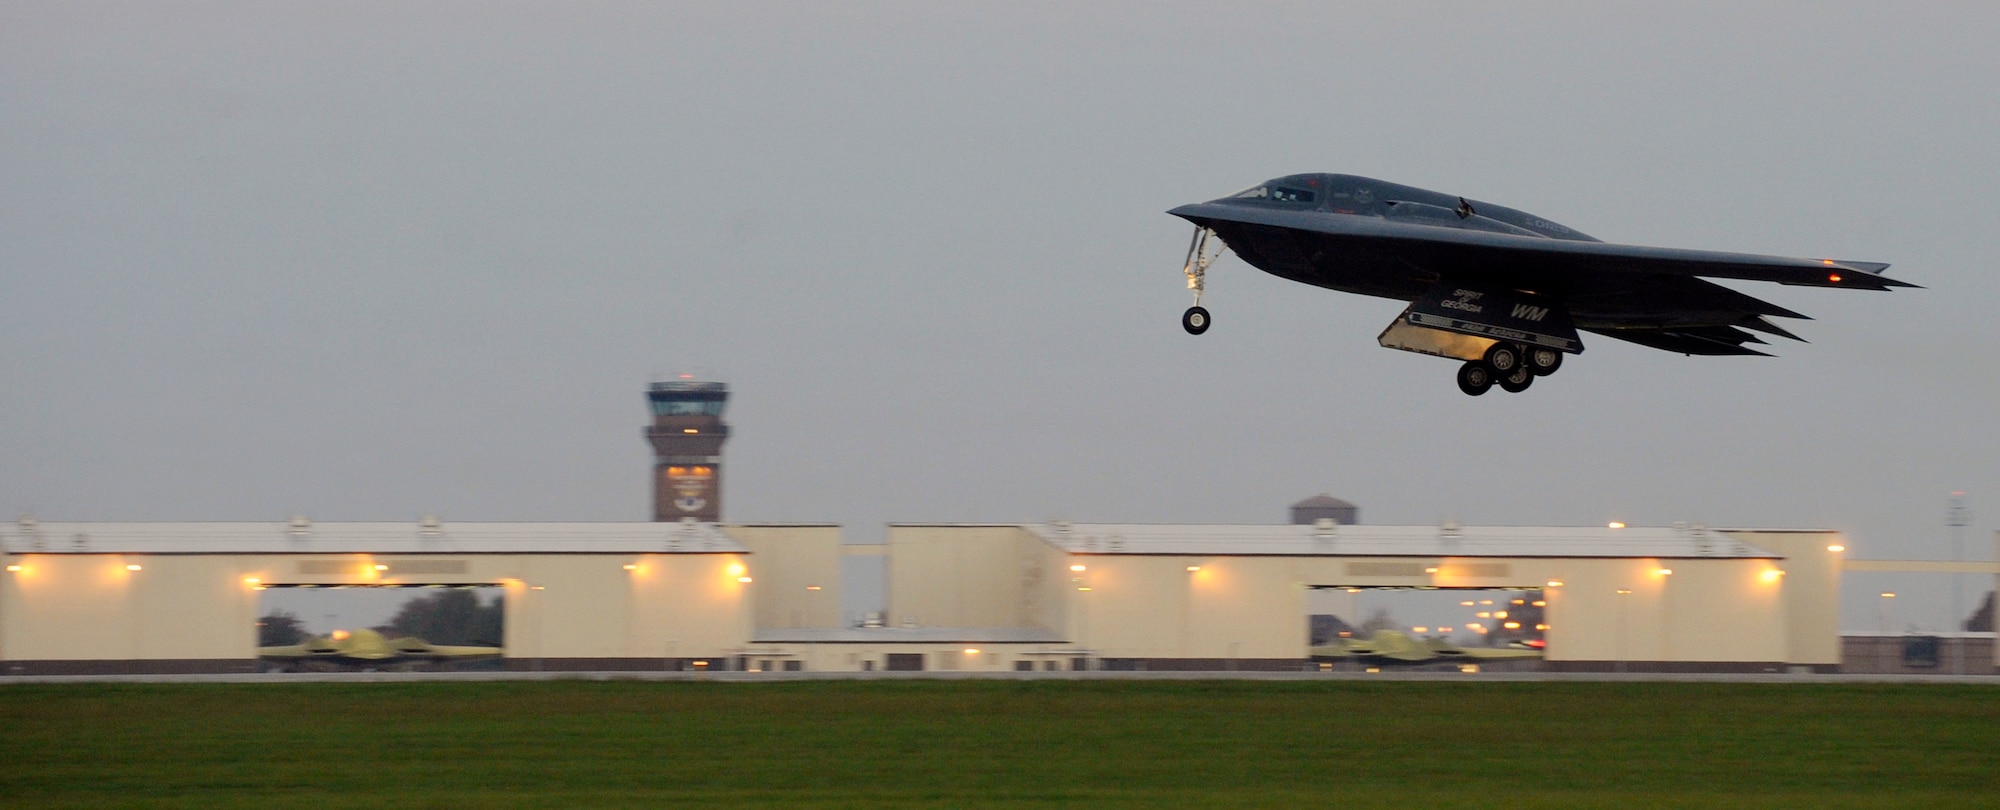 A B-2 Spirit takes off from Whiteman Air Force Base, Mo., Oct. 26, 2014. The aircraft is a multi-role bomber capable of delivering both conventional and nuclear munitions. The B-2's flight was in support of Global Thunder 15, a field training and battle staff exercise designed to exercise all U.S. Strategic Command mission areas with primary emphasis on nuclear command, control and communications. (U.S. Air Force photo by Staff Sgt. Alexandra M. Boutte/Released)